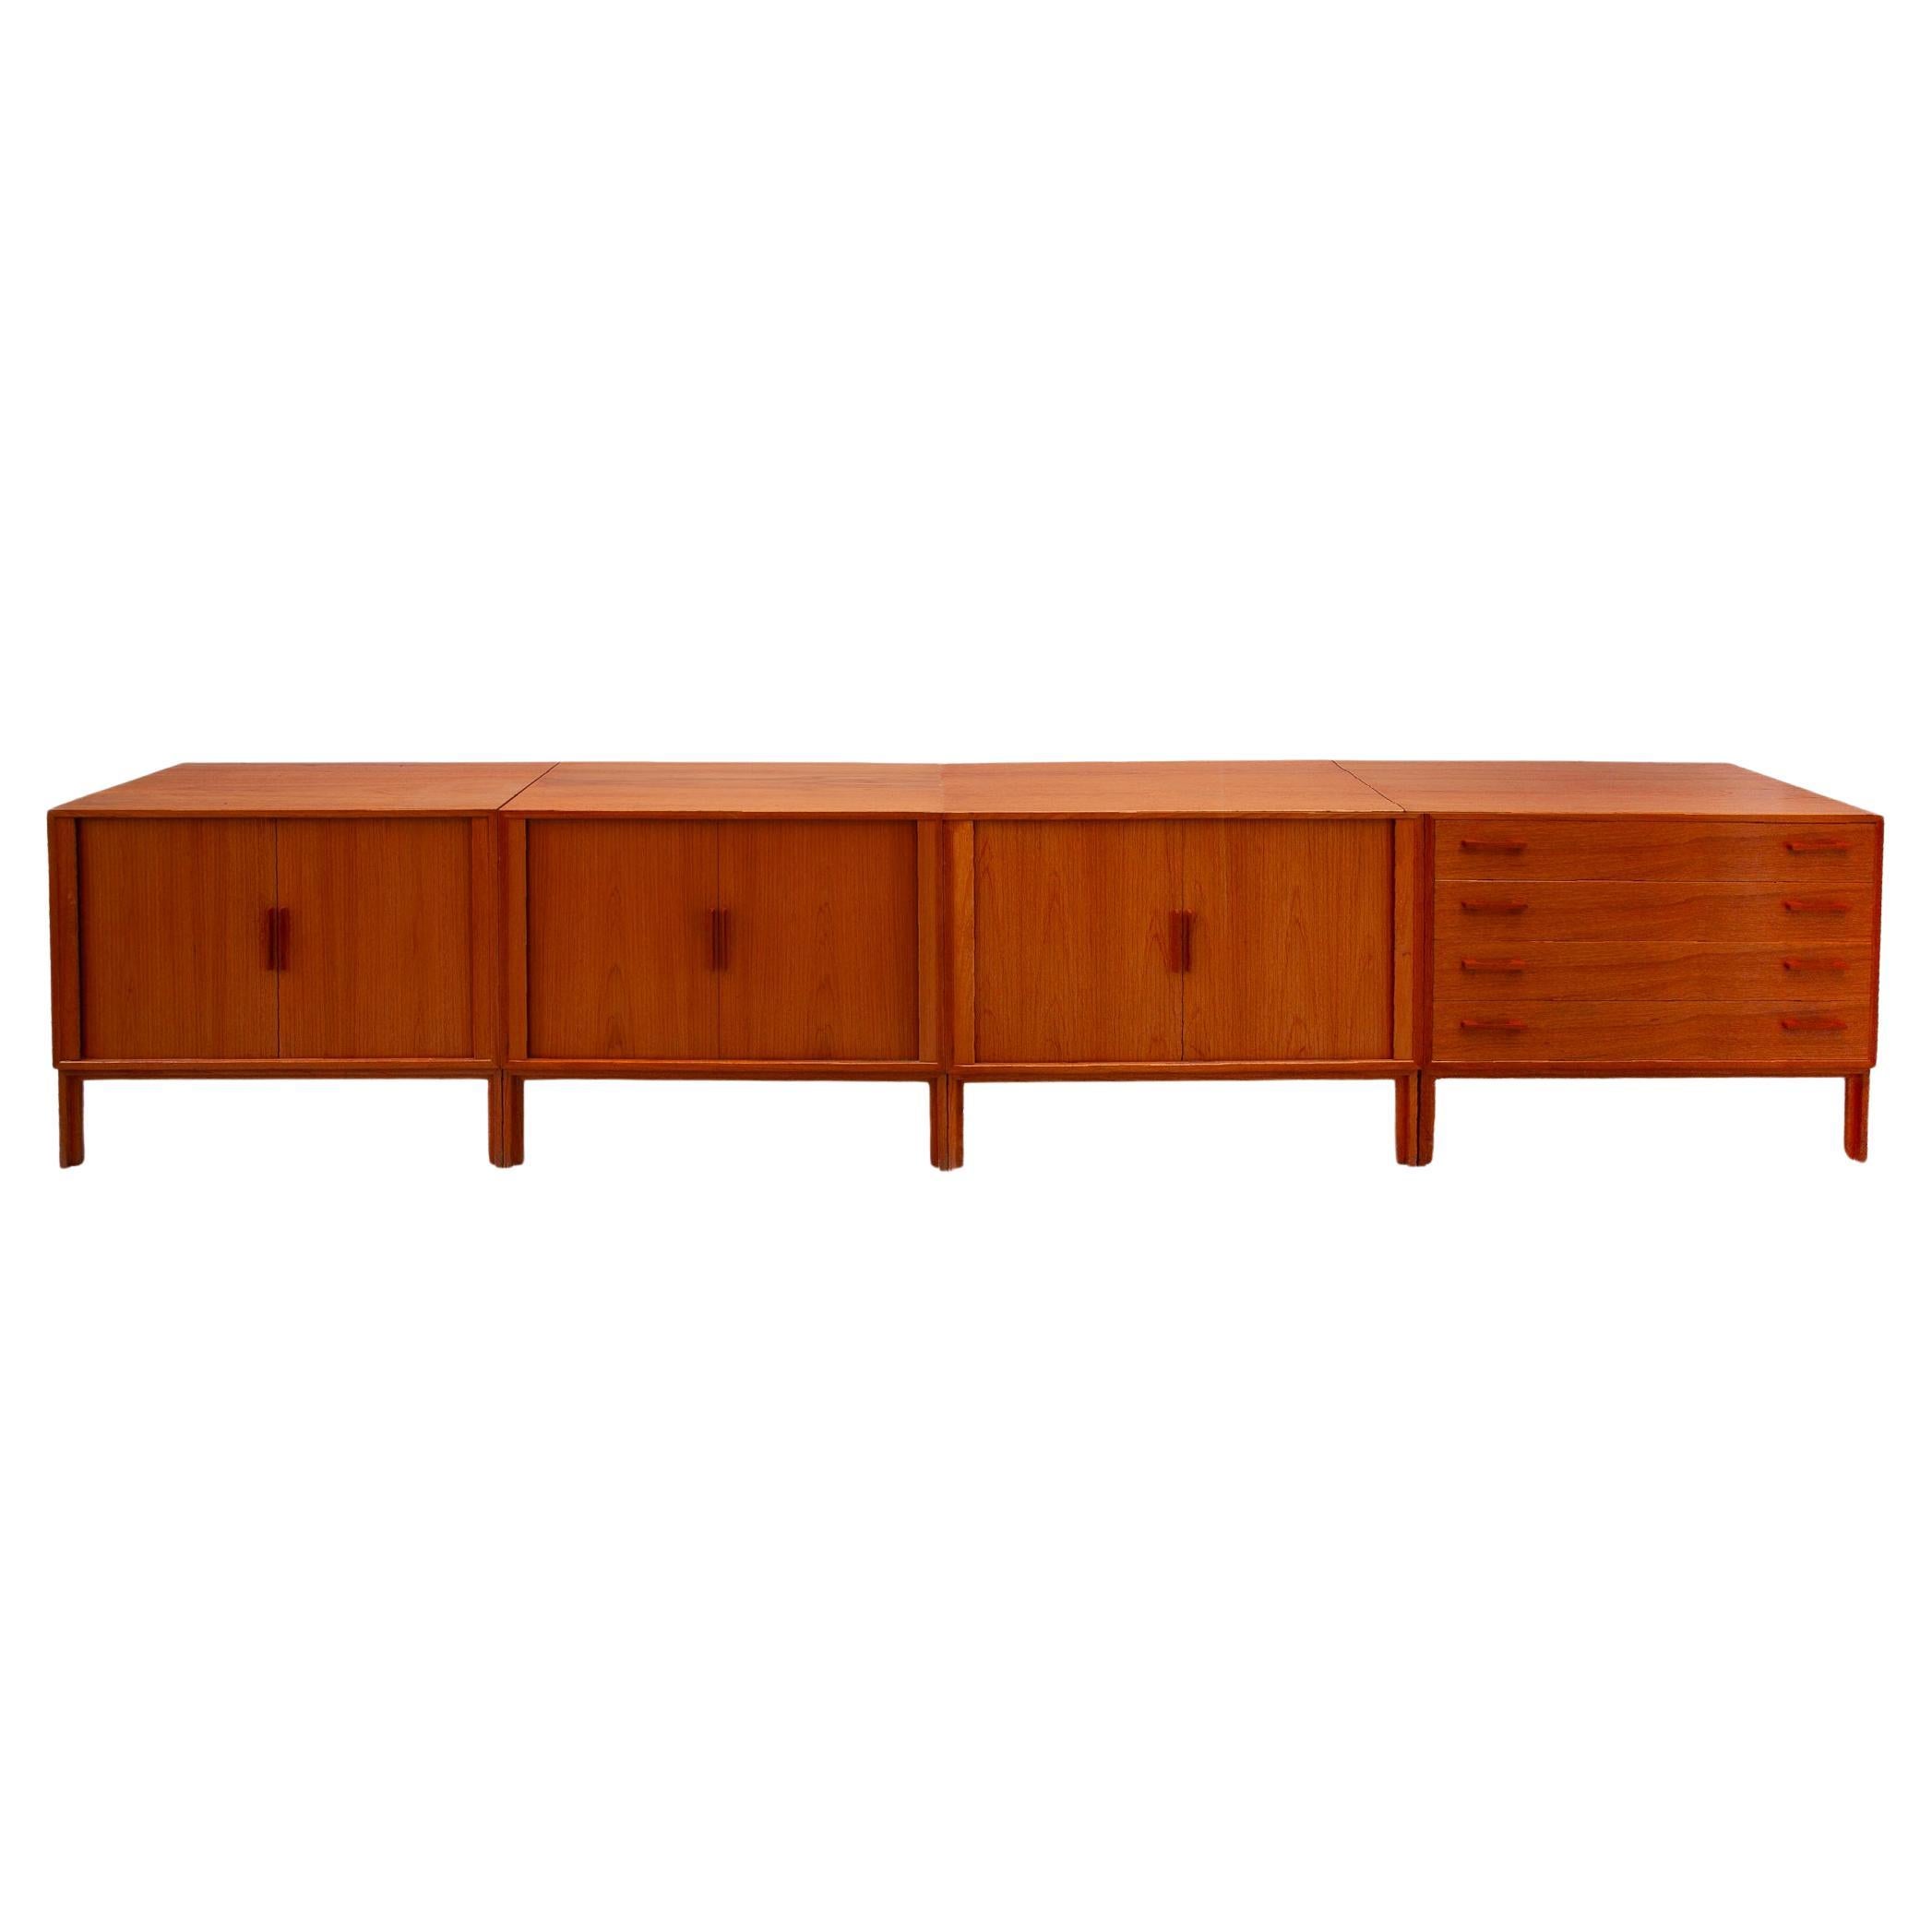 Modular Sideboard with Sliding Doors designed by Kai Kristiansen 1970s For Sale